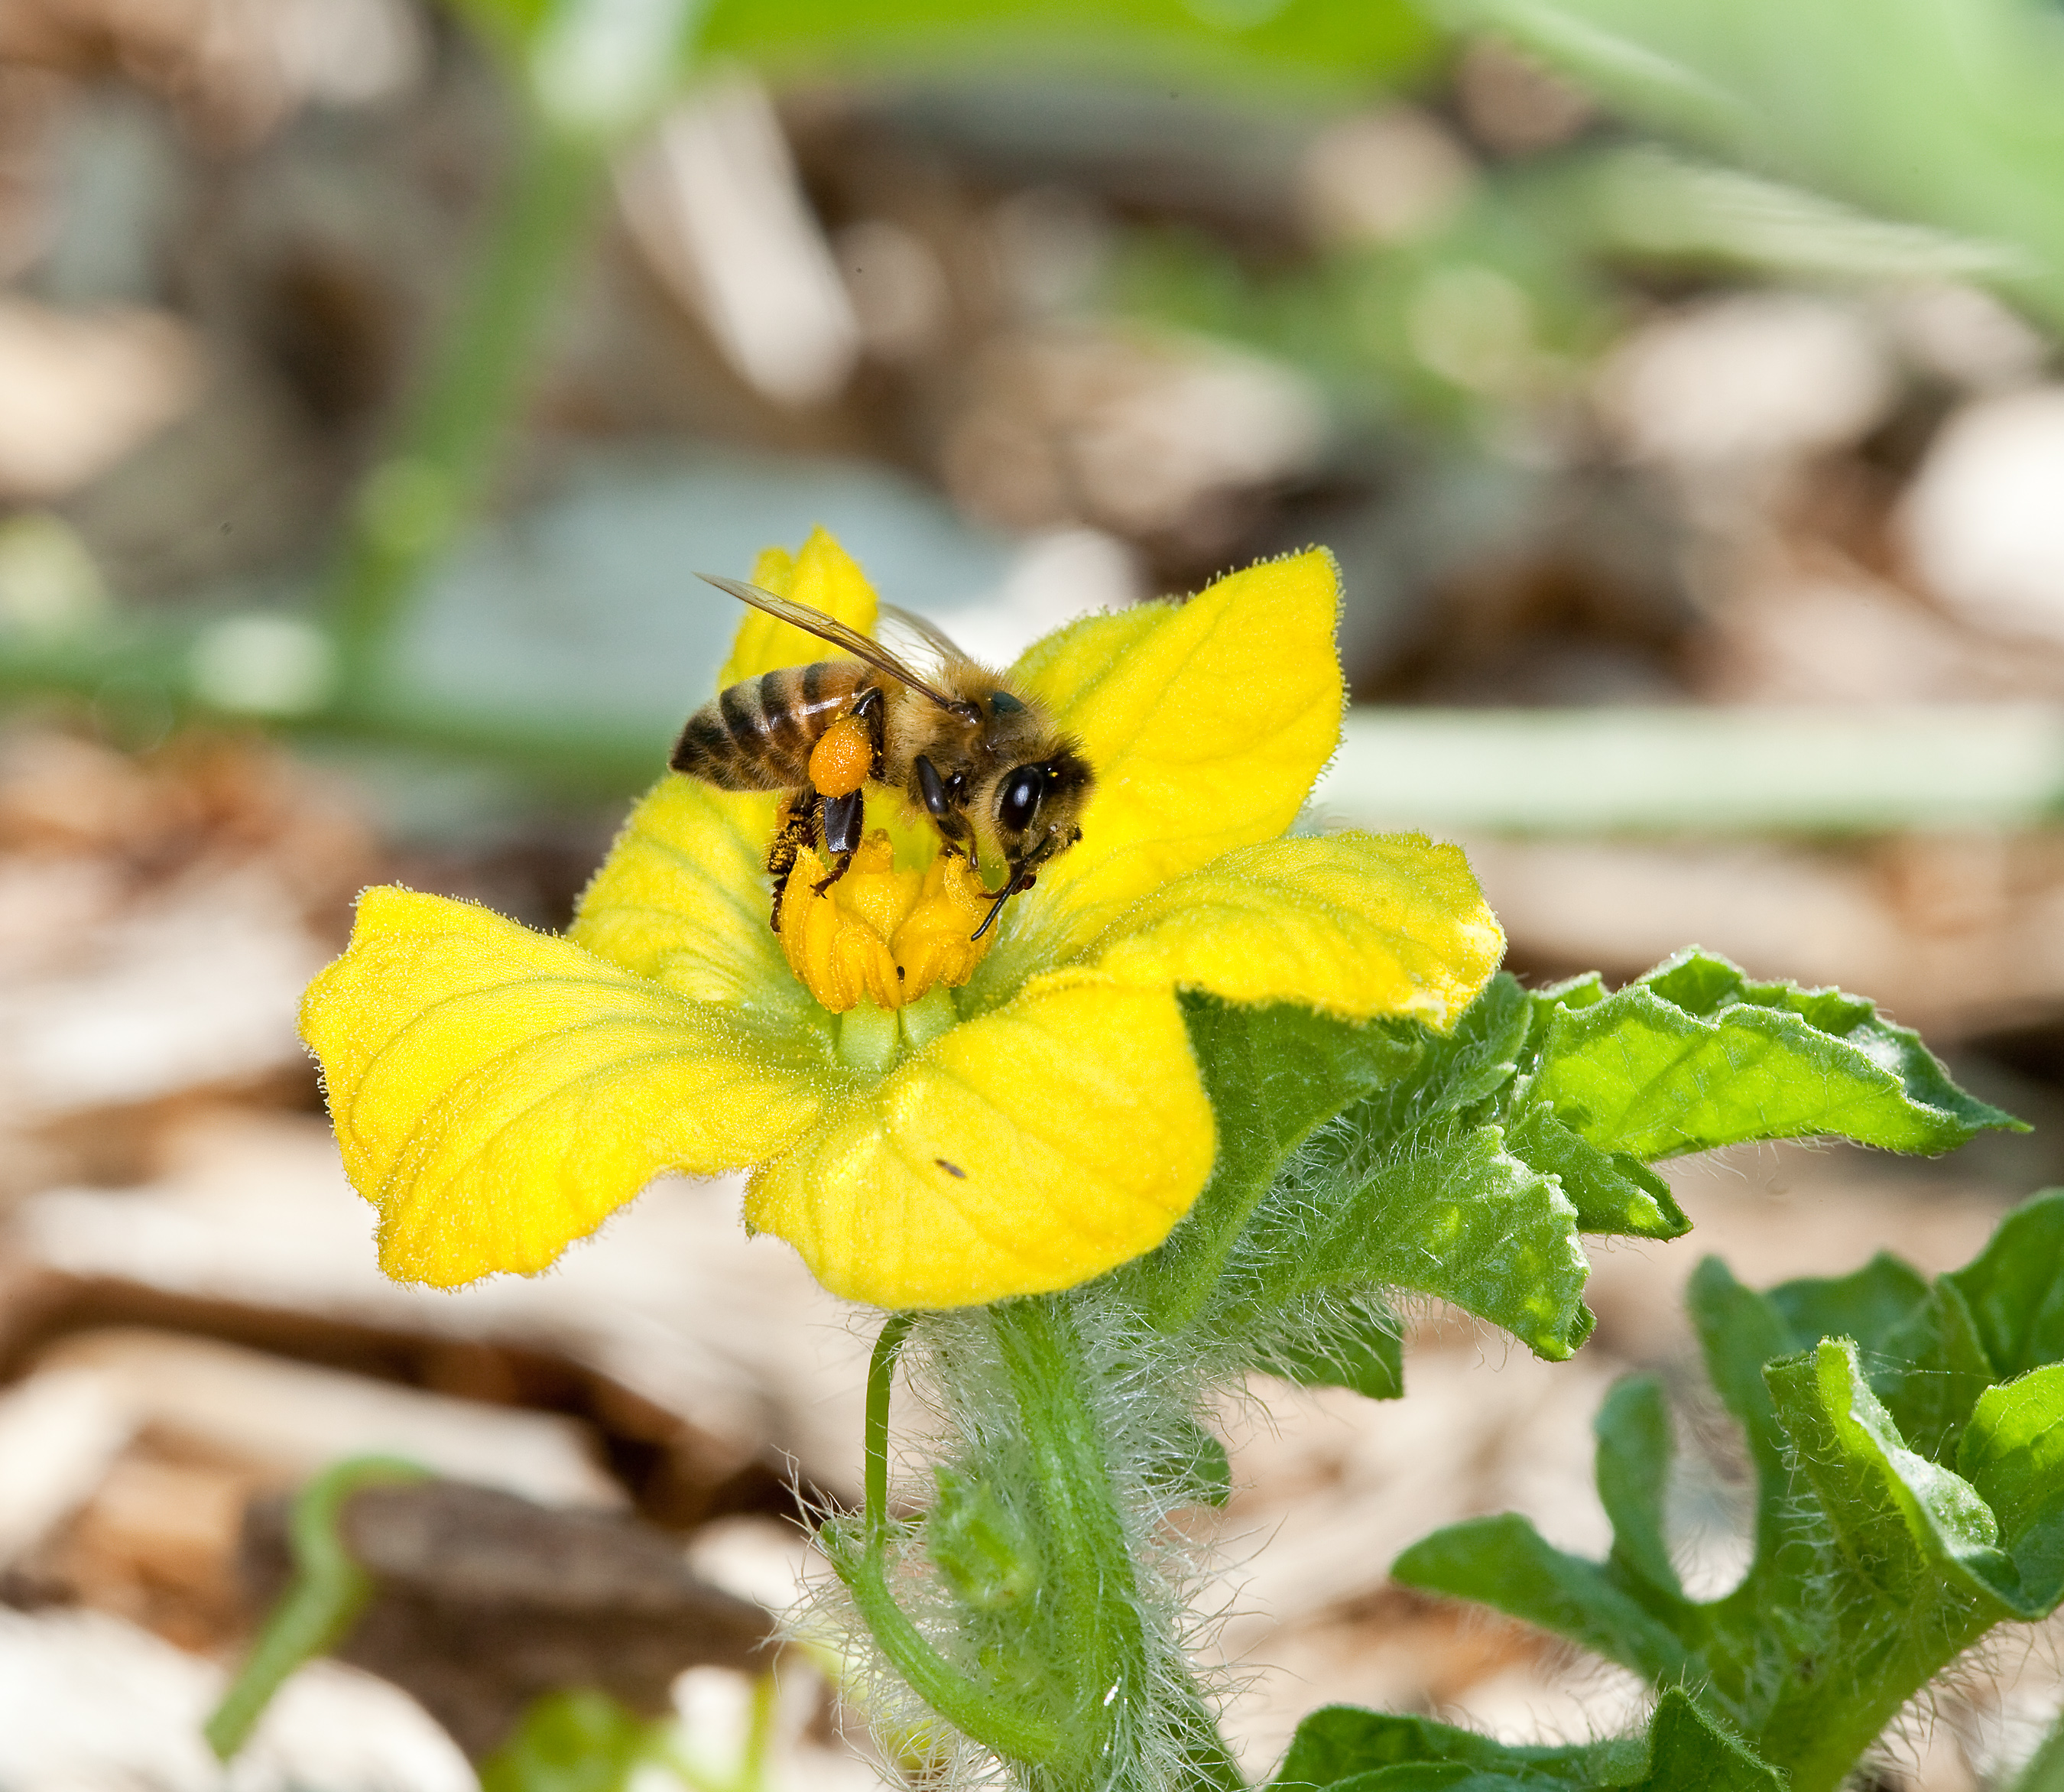 Announcing New Steps to Promote Pollinator Health | whitehouse.gov